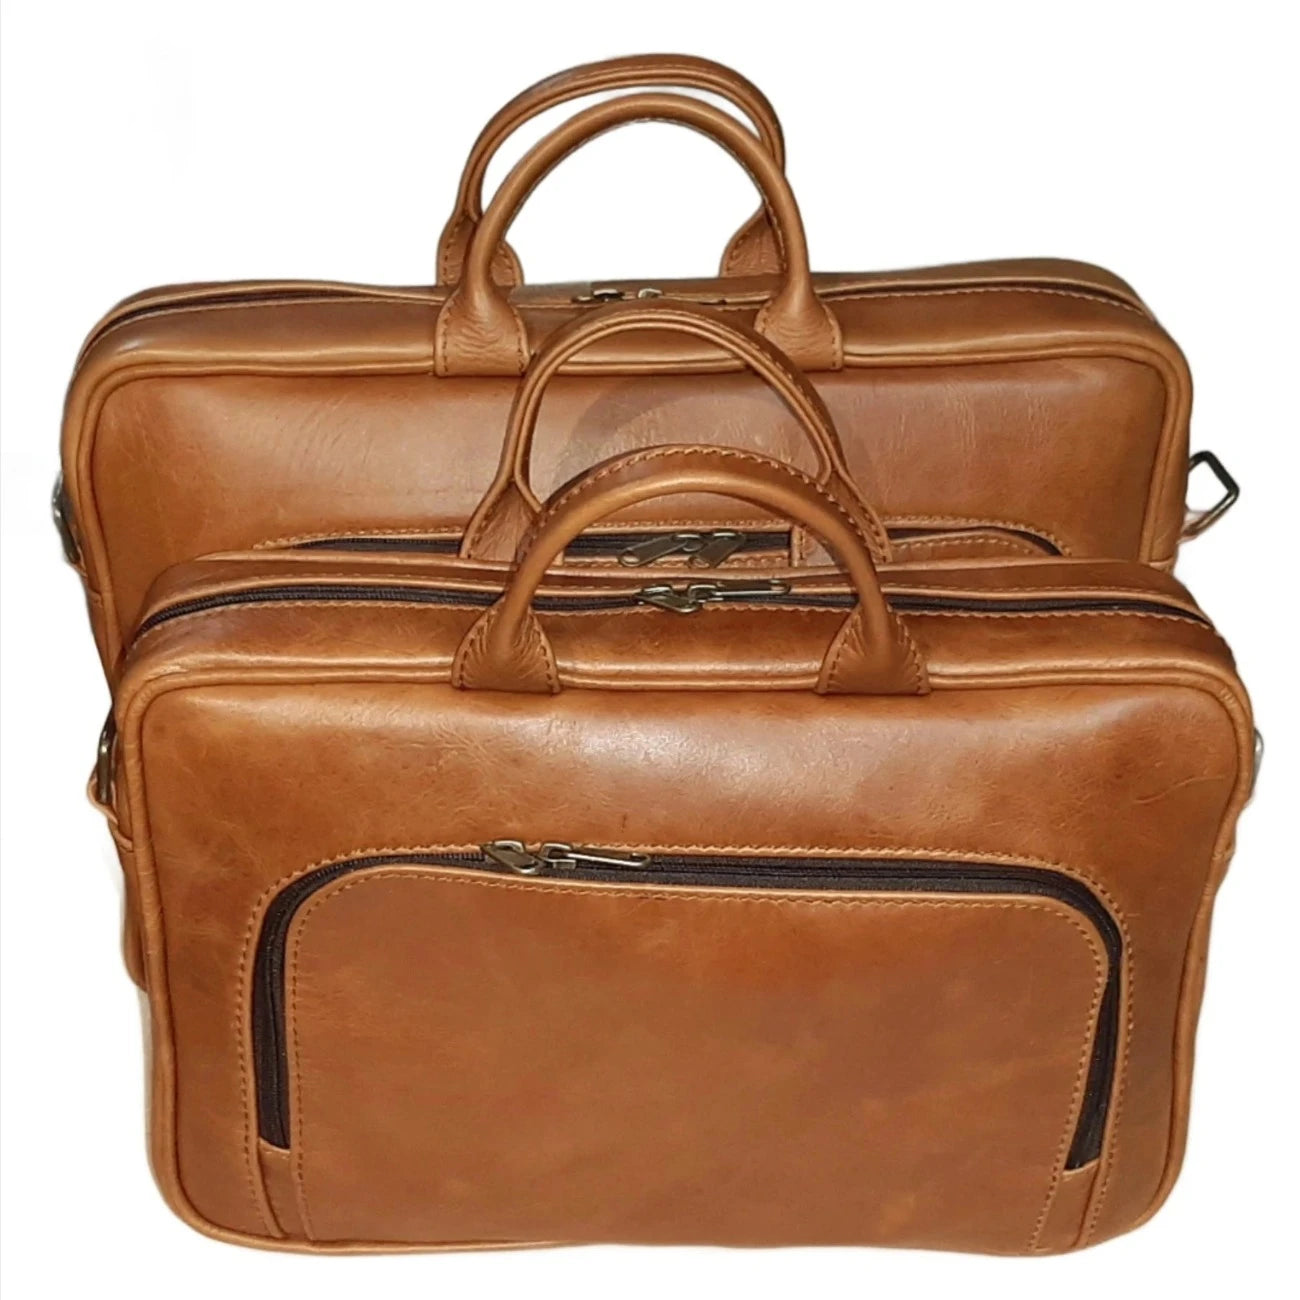 Iconic 14 & 15 inches laptop briefcase bag - Light tan at Cape Masai Leather 